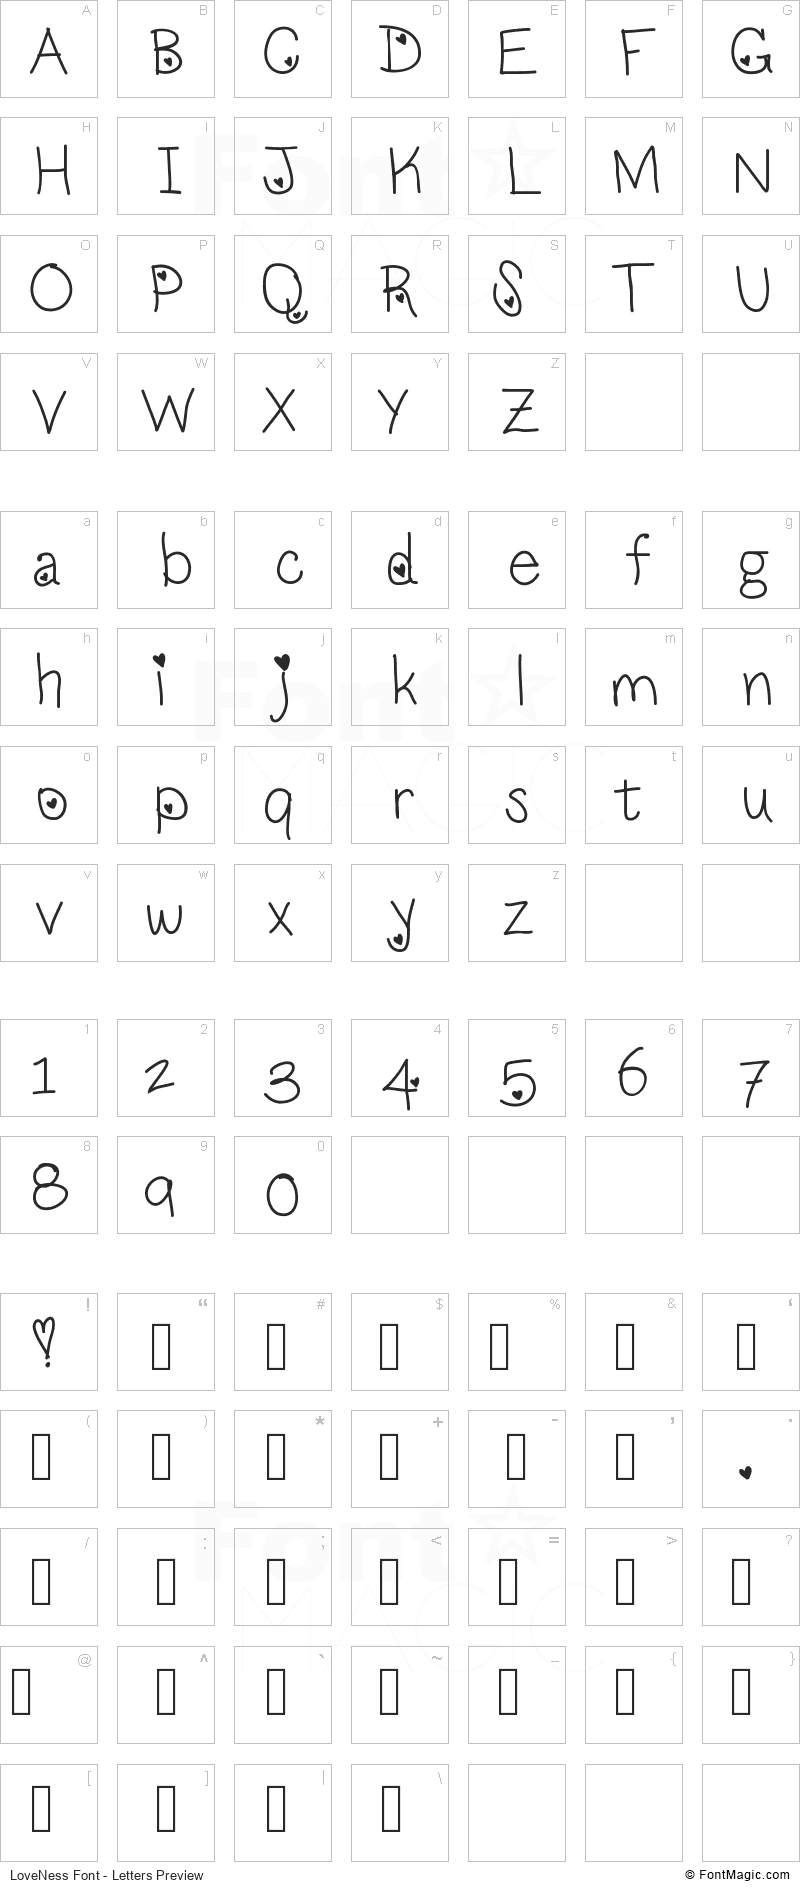 LoveNess Font - All Latters Preview Chart